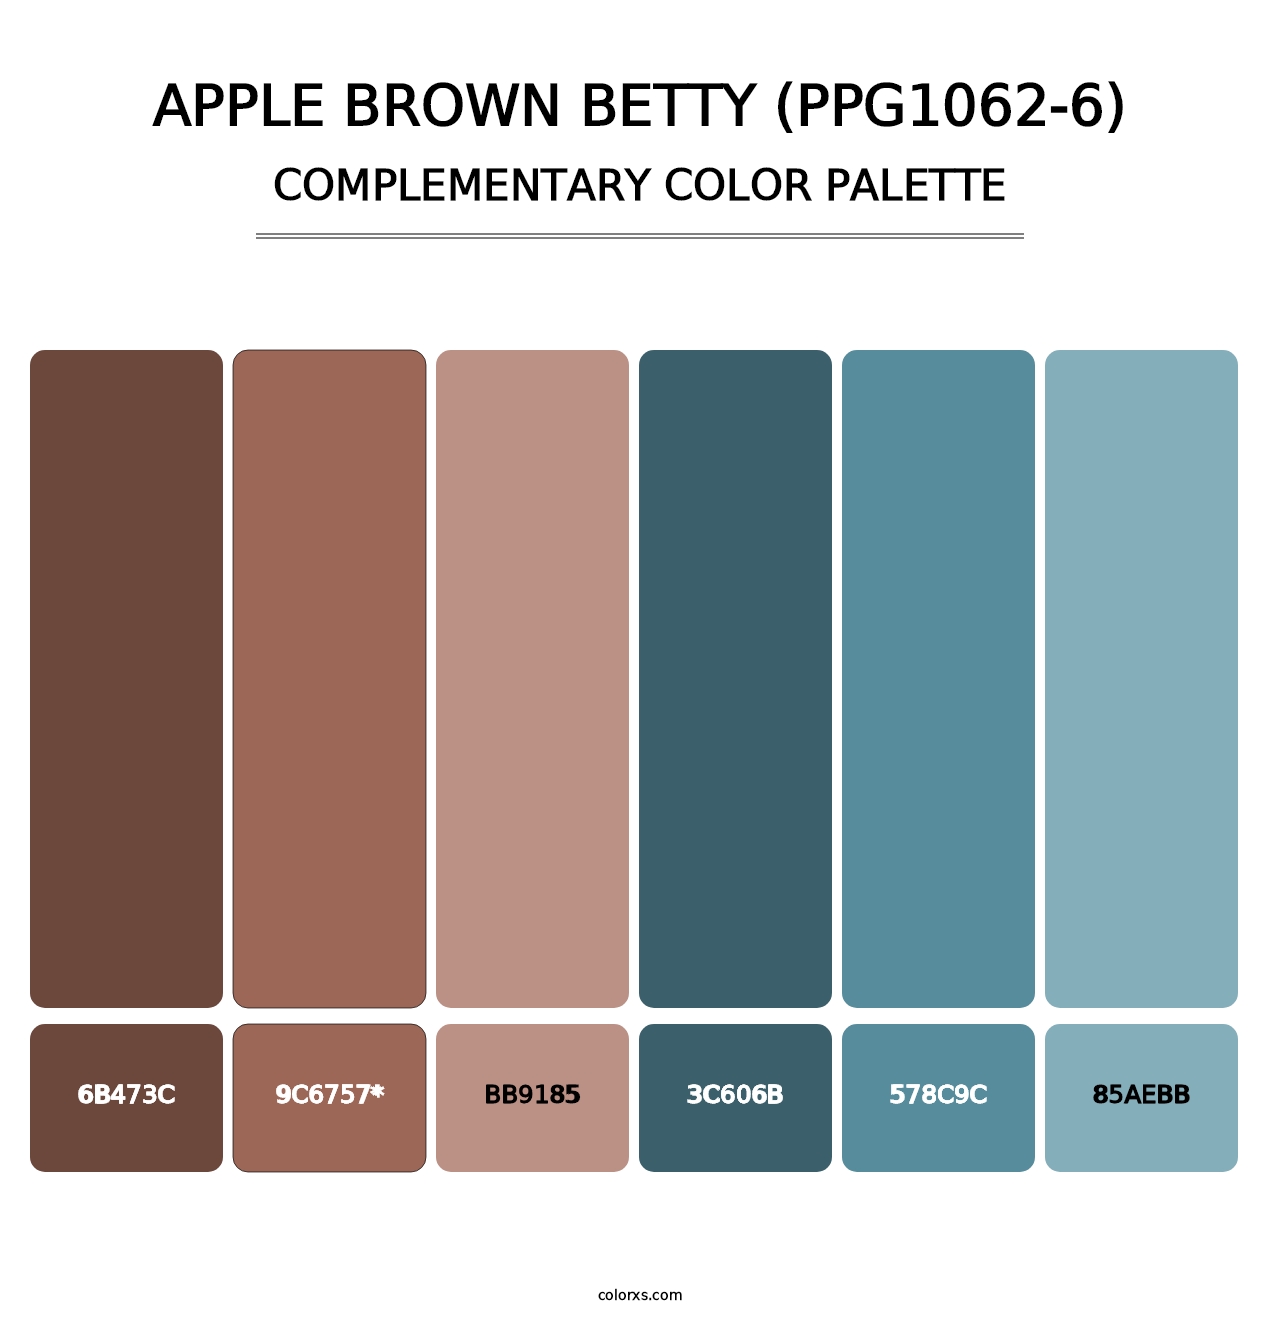 Apple Brown Betty (PPG1062-6) - Complementary Color Palette